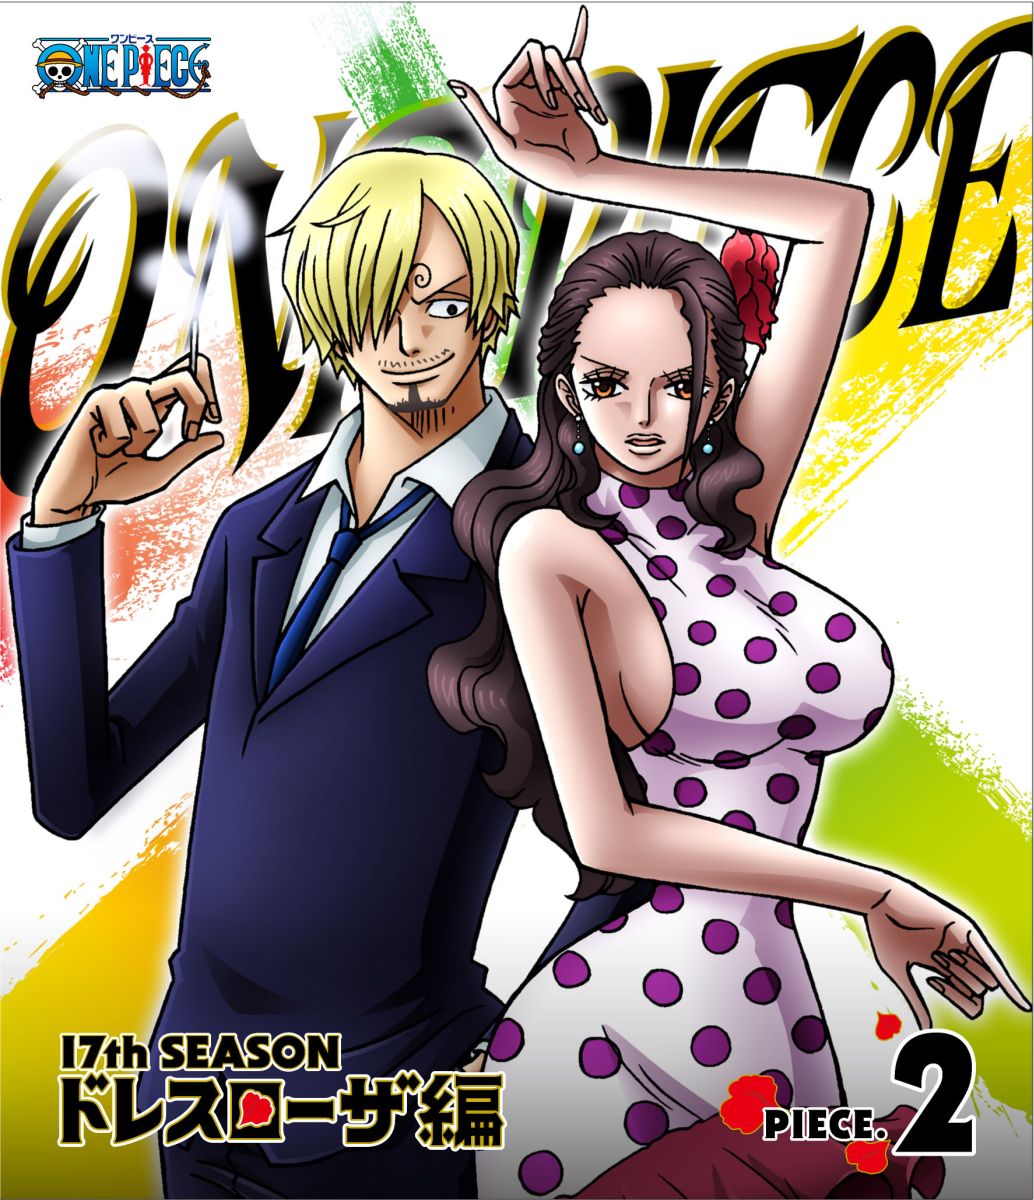 ONE PIECE ワンピース 17THシーズン ドレスローザ編 PIECE.2 [ 田中真弓 ]